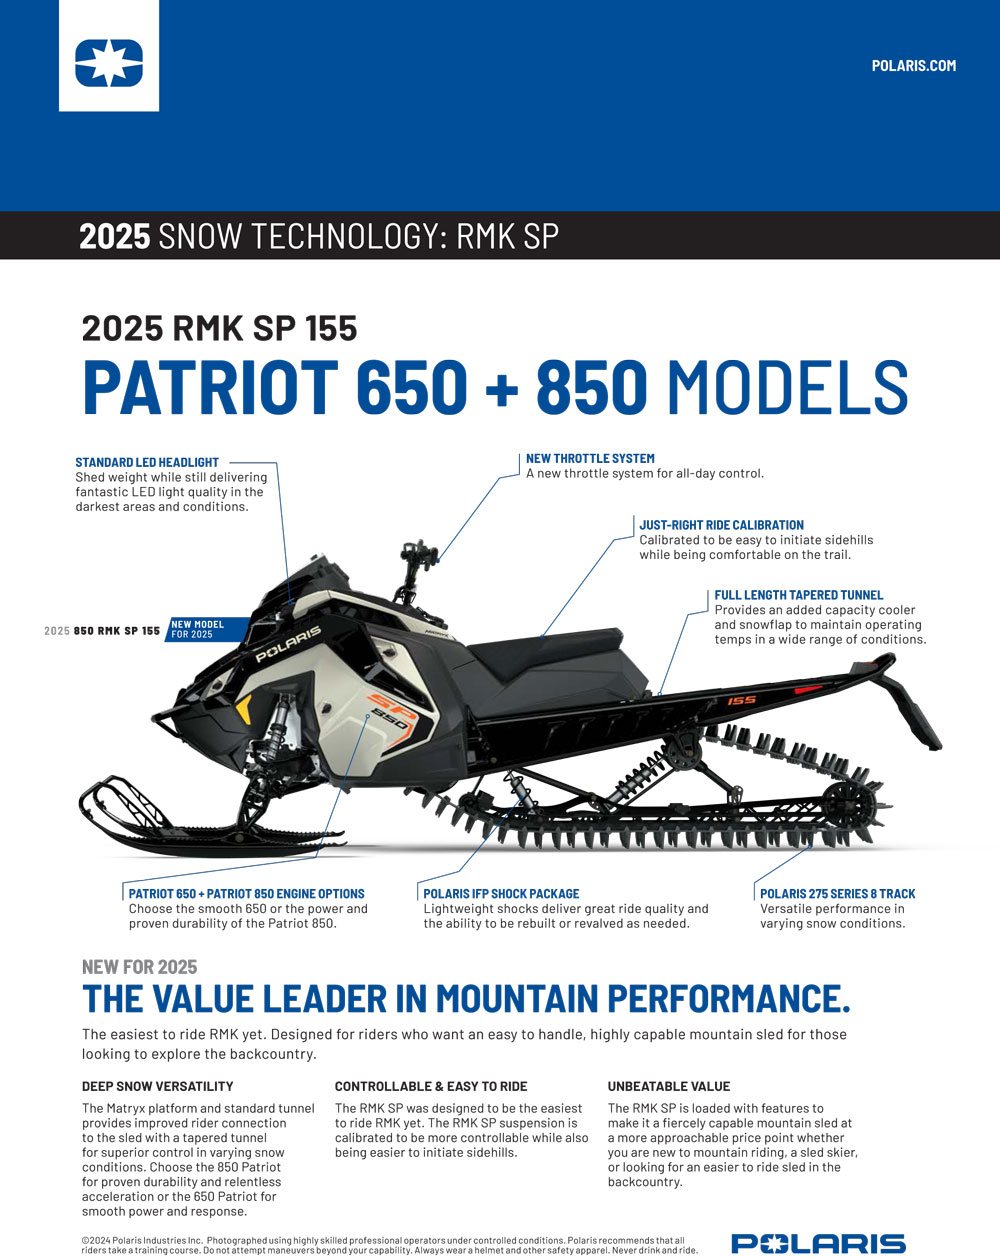 Patriot 650 and 850 RMK SP Features